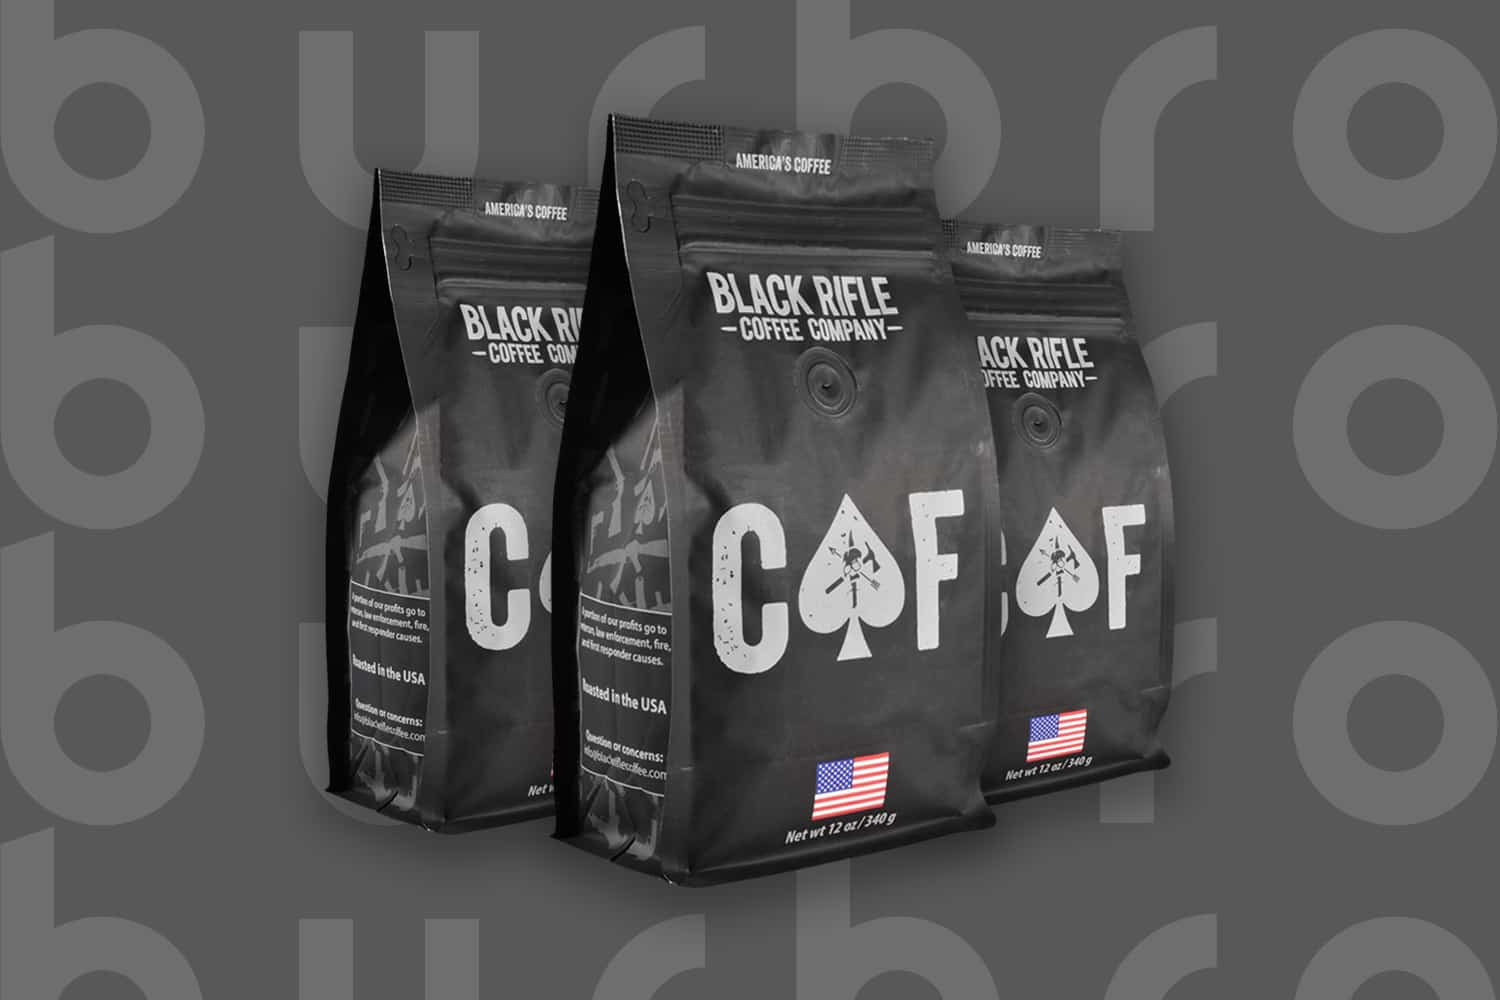 This is the cover photo for our Best Strong Coffee article. It features 3 black and grey bags of Black Rifle CAF 2x Caffeine coffee overlaid on a dark background with embossed Burbro logo.